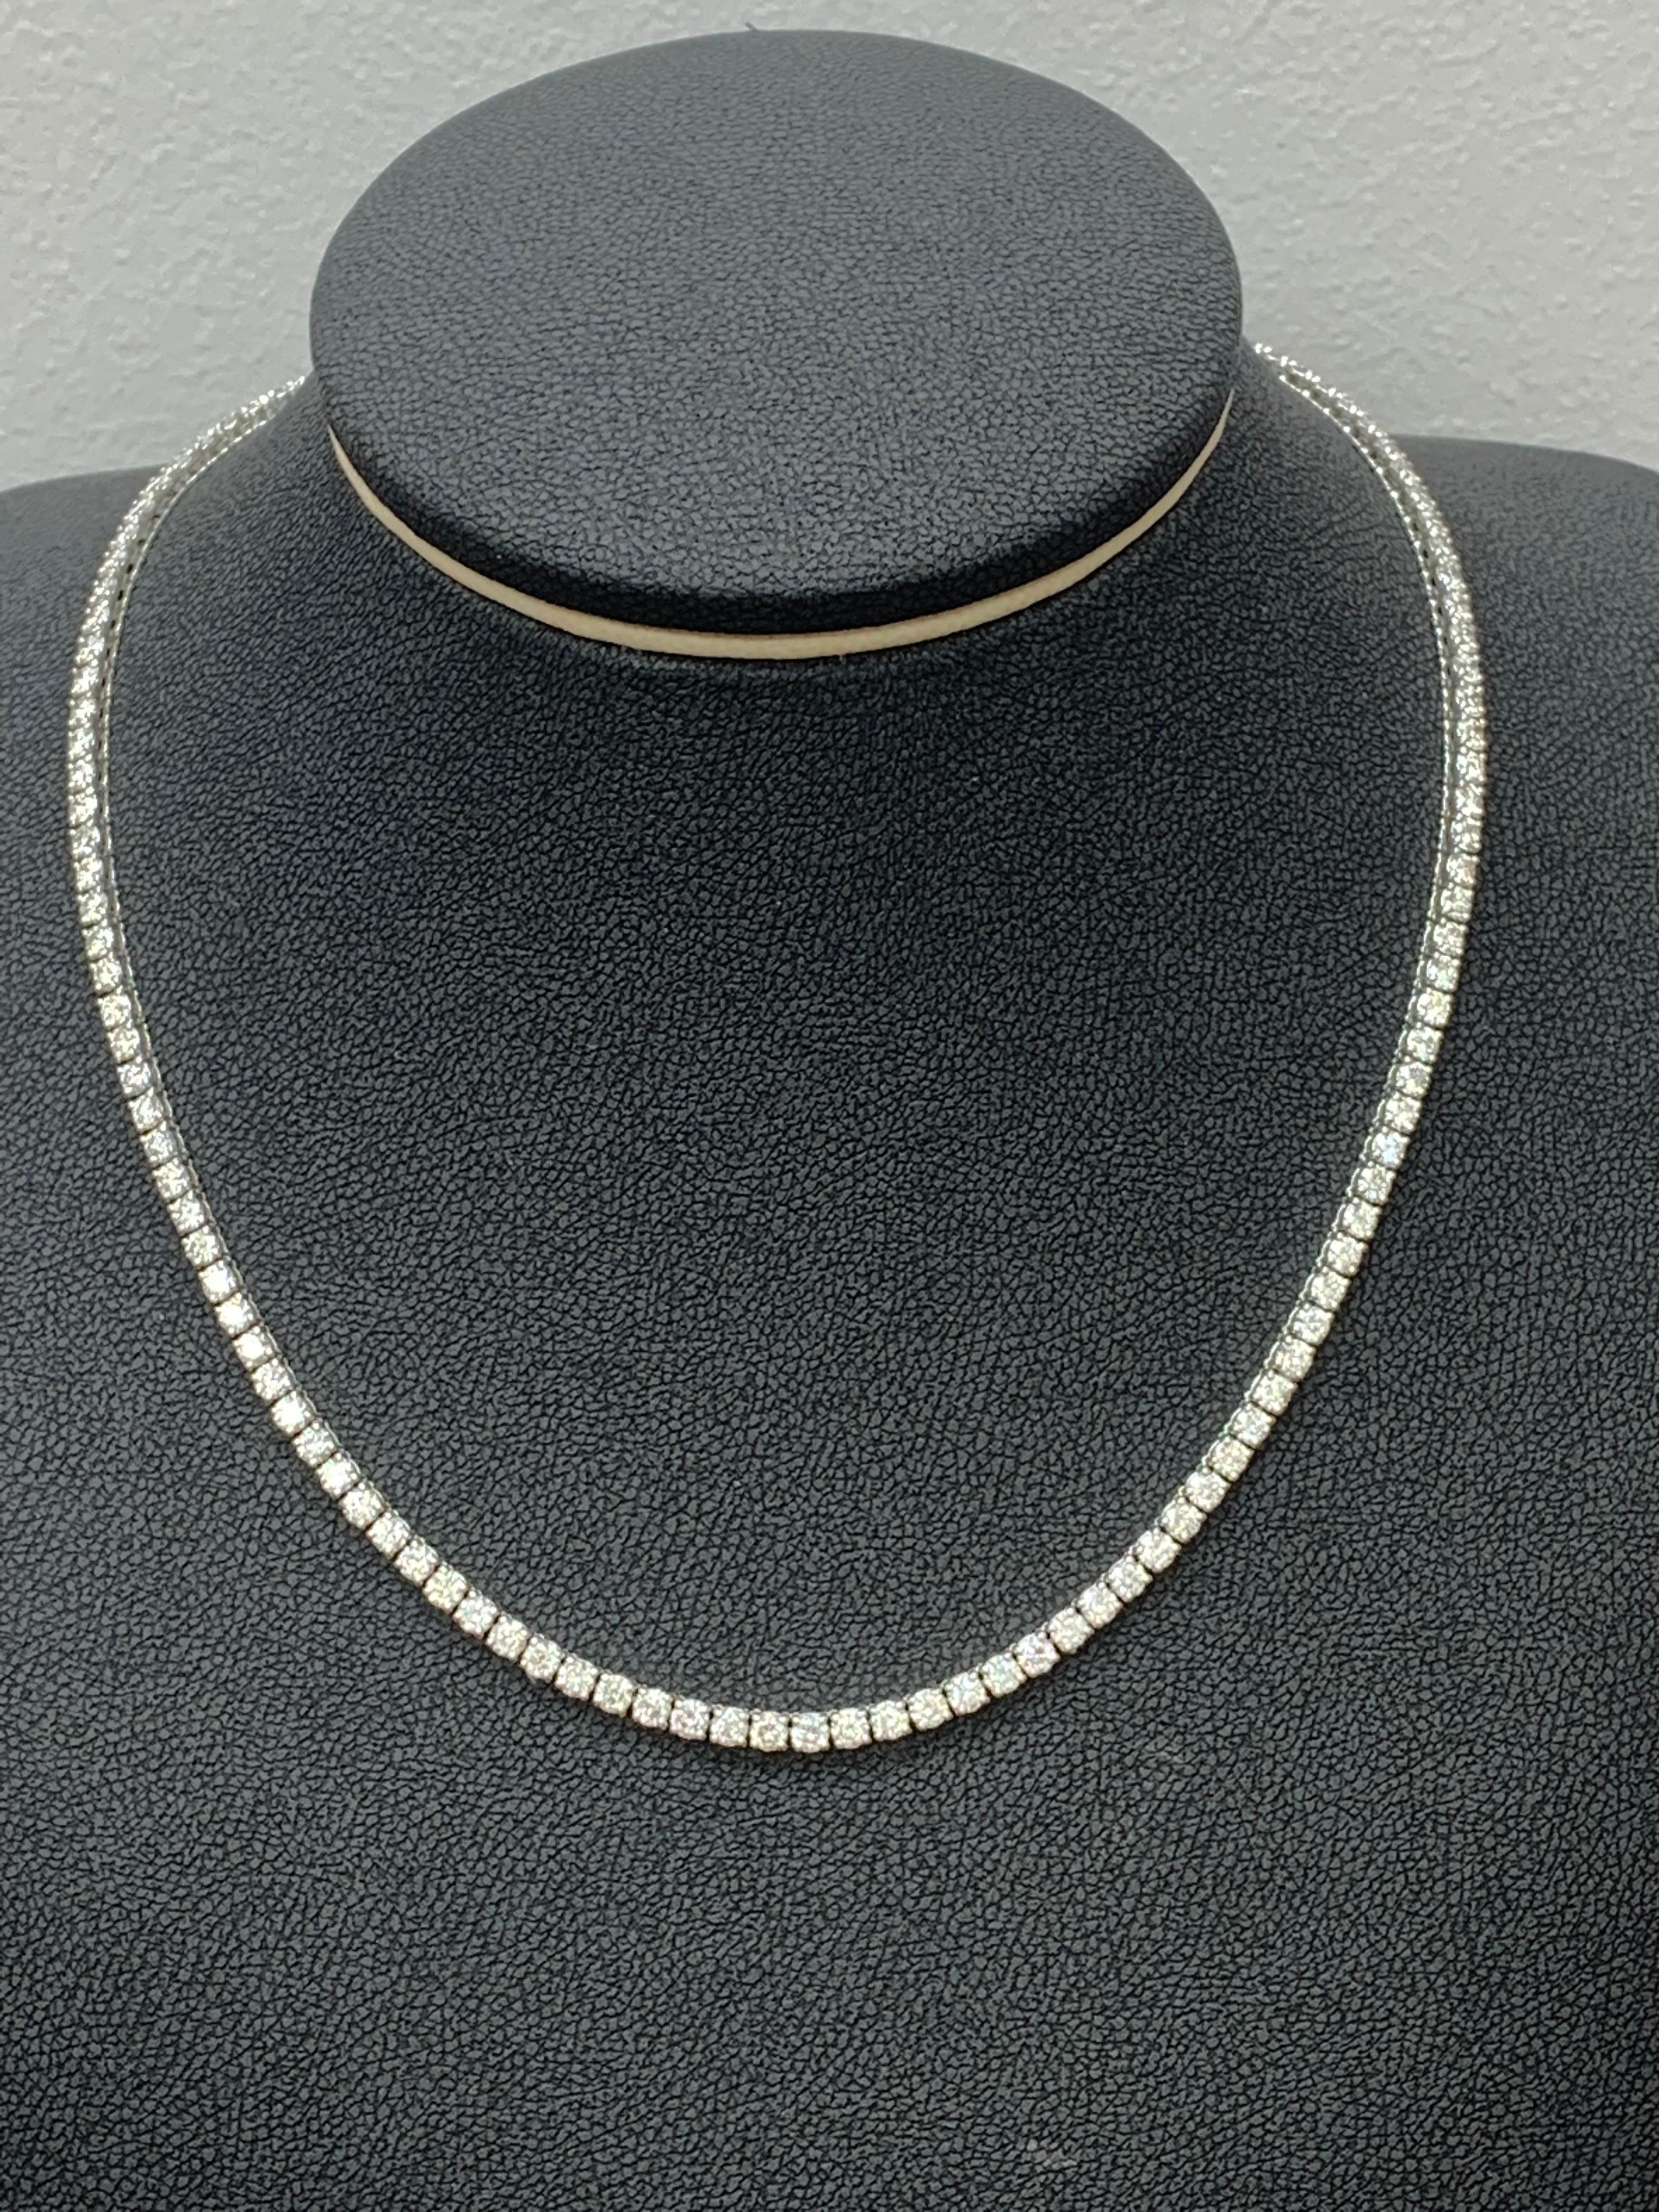 13.01 Carat Diamond Tennis Necklace in 14K White Gold For Sale 6